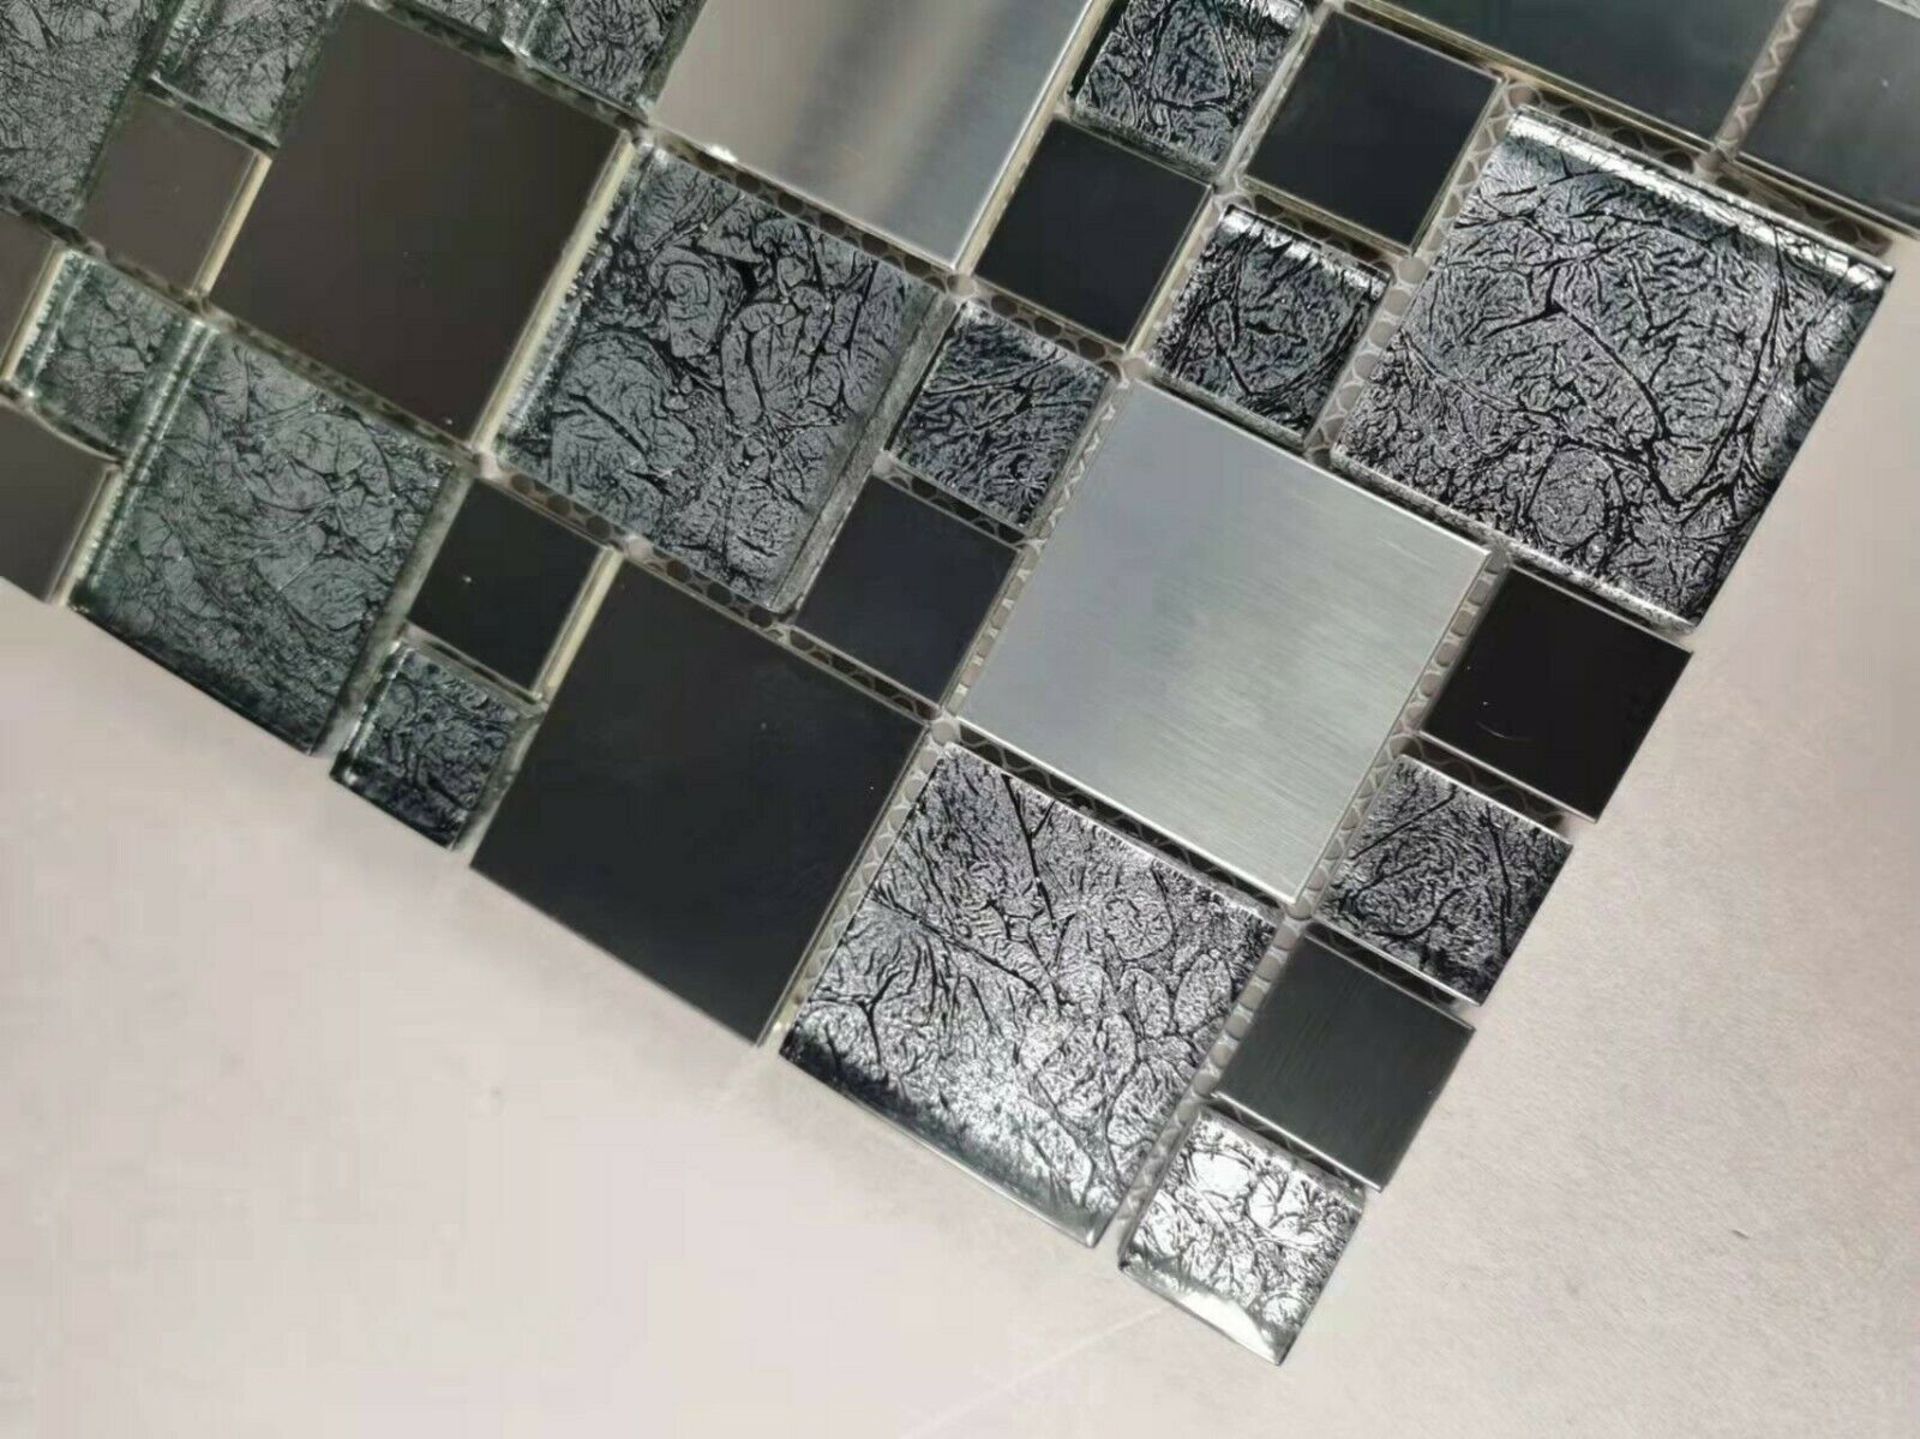 Stock Clearance High Quality Glass/Stainless Steel Mosaic Tiles - 11 Sheets - One Square Metre - Image 2 of 5